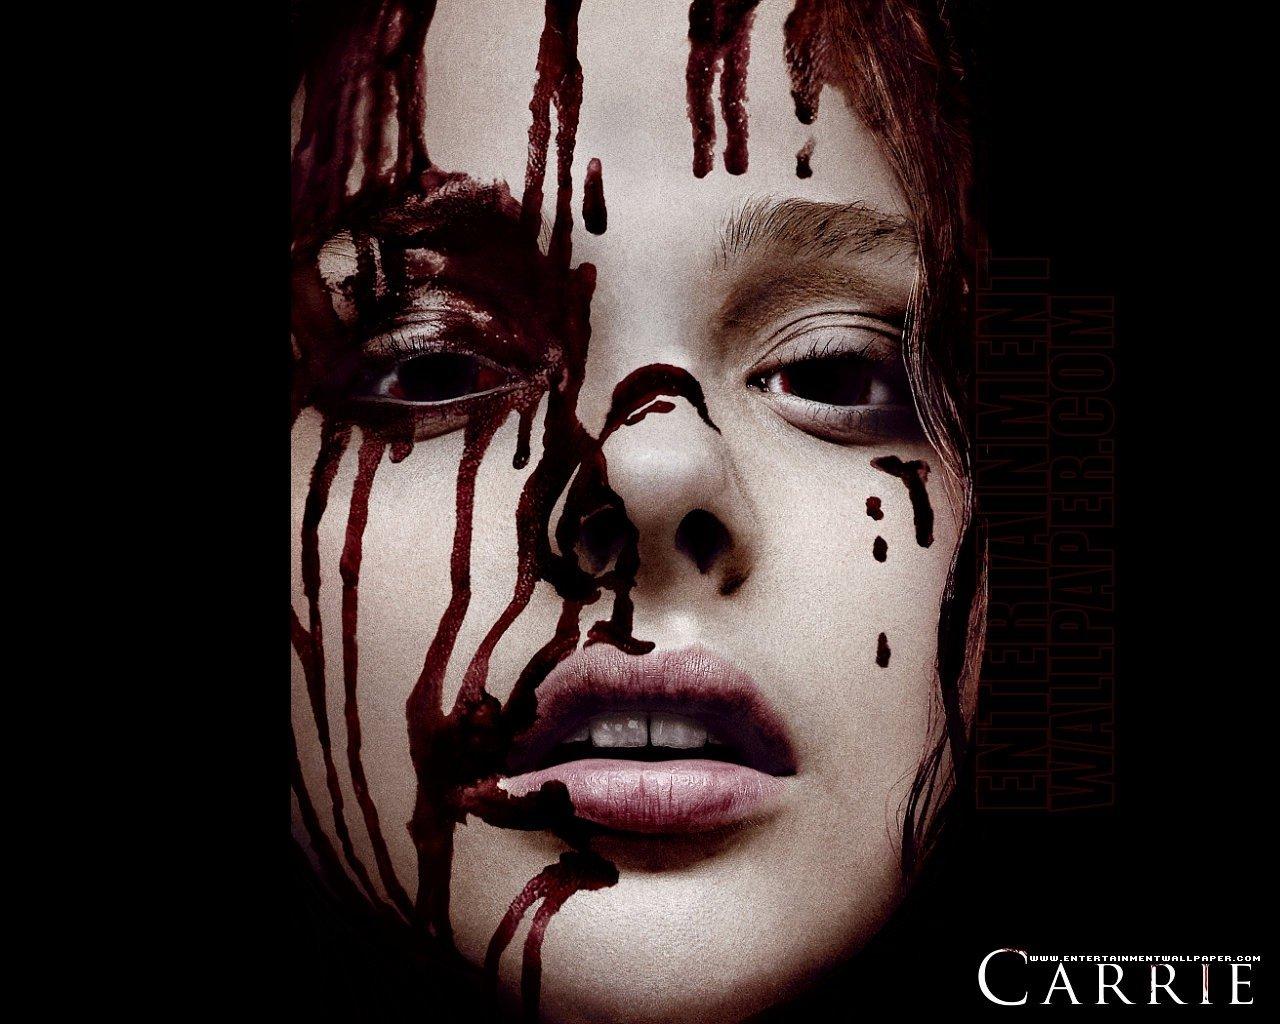 Carrie (2013) HD Wallpaper and Background Image